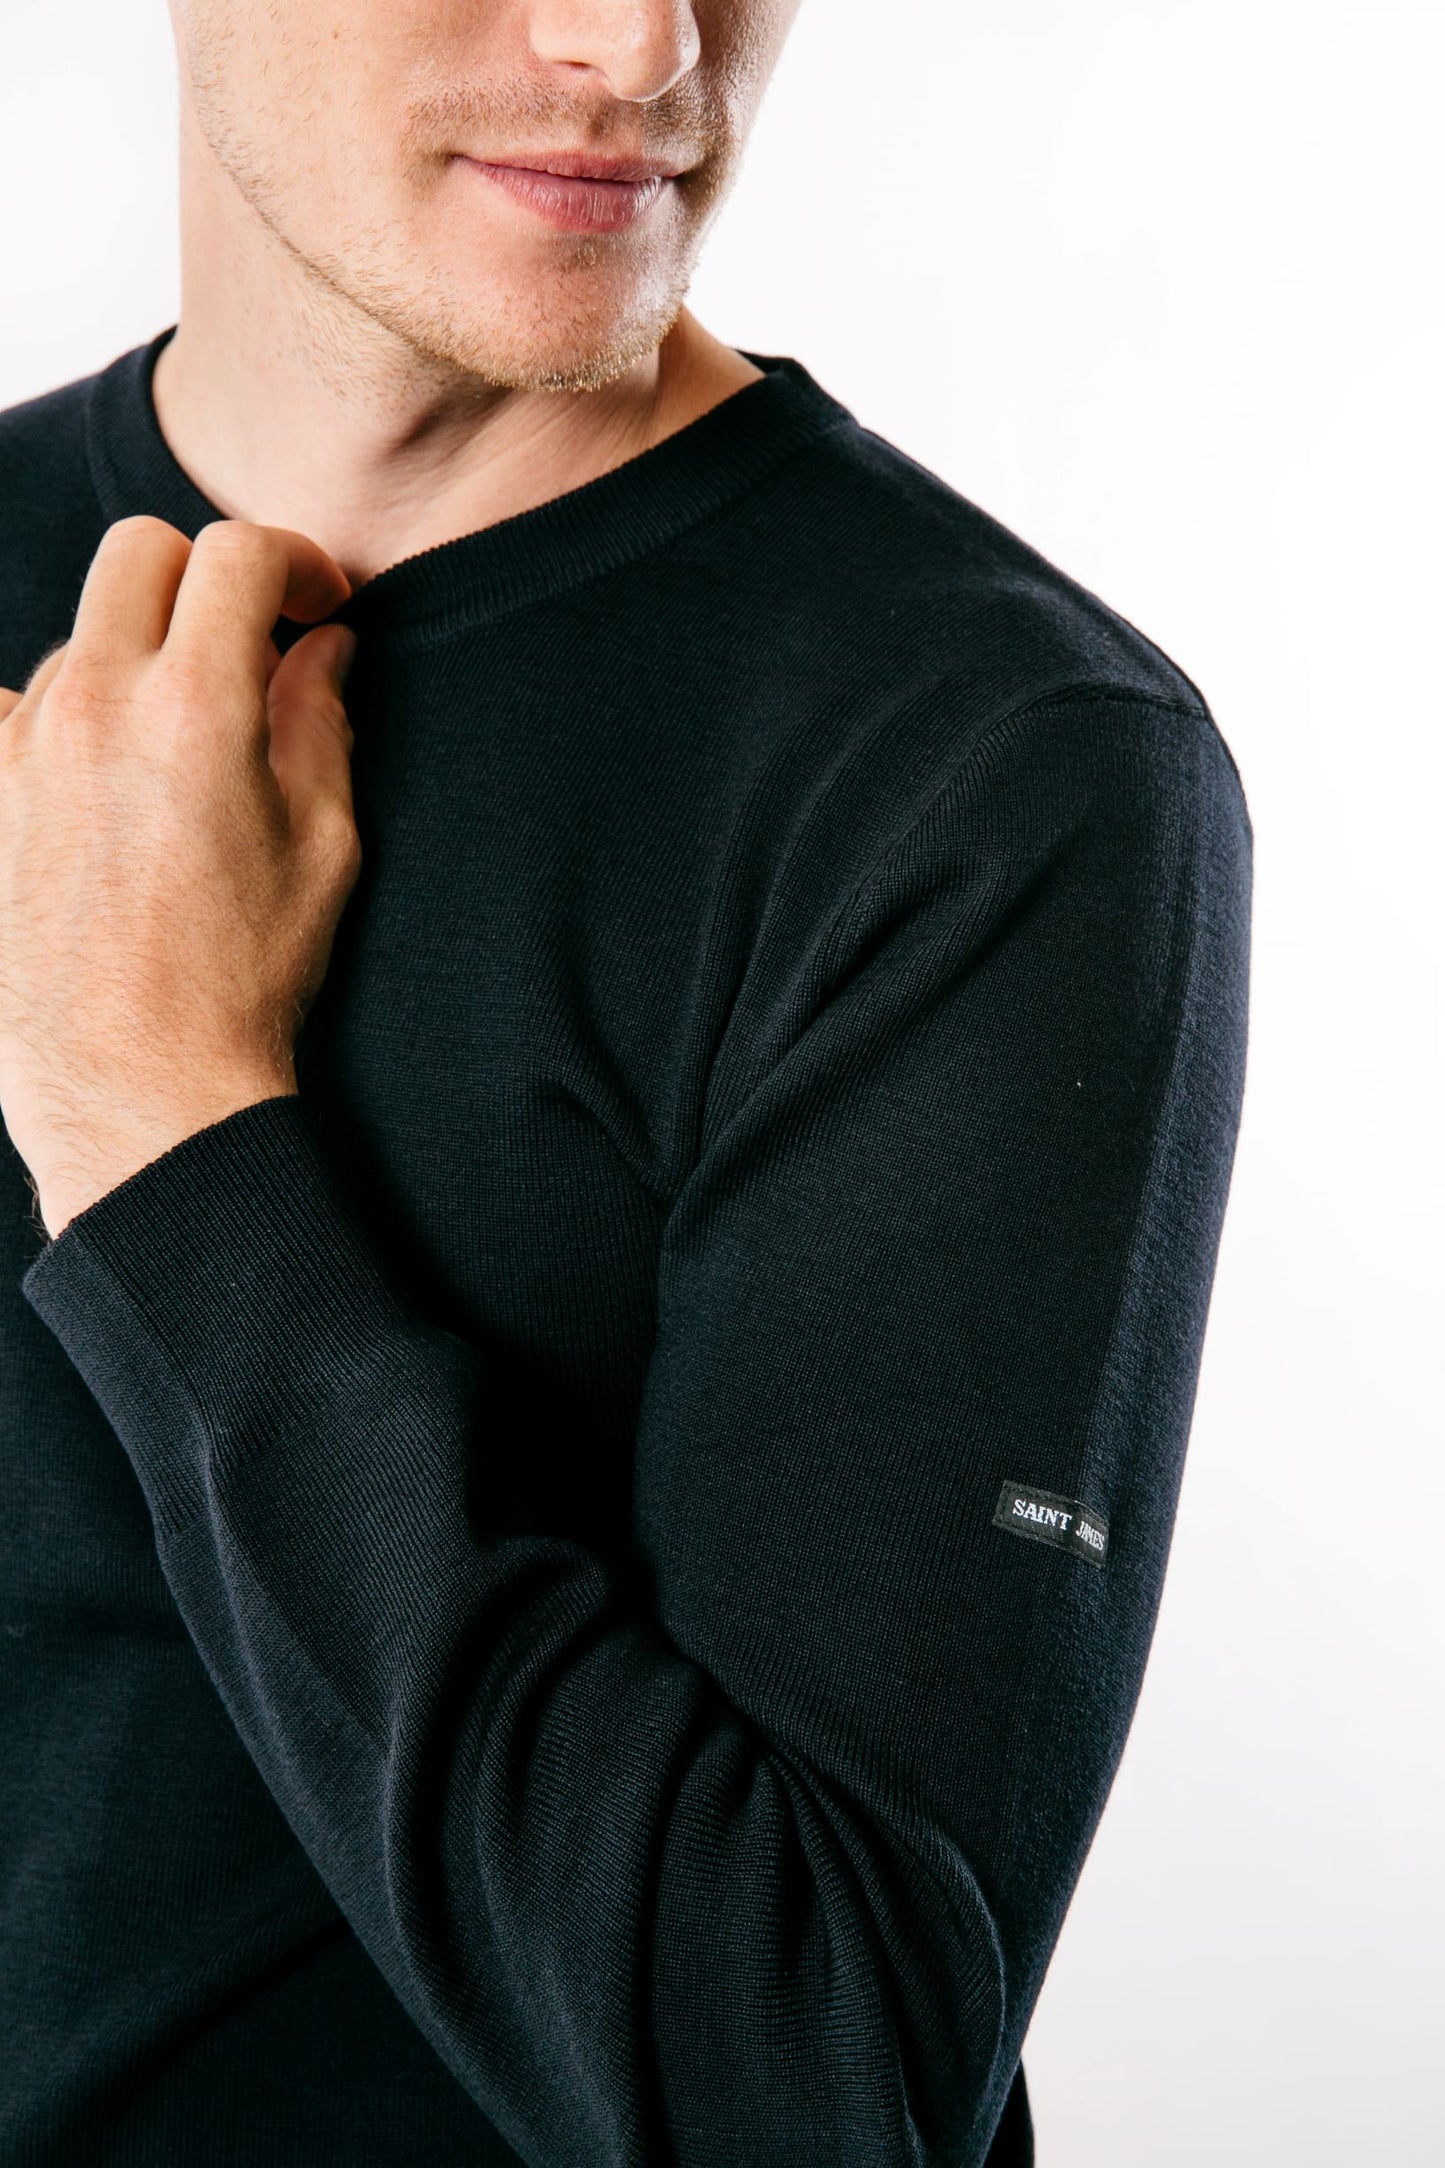 Saint James Sweater In Regular Classic Fit. Cruiser   Chosen In A Navy Colour